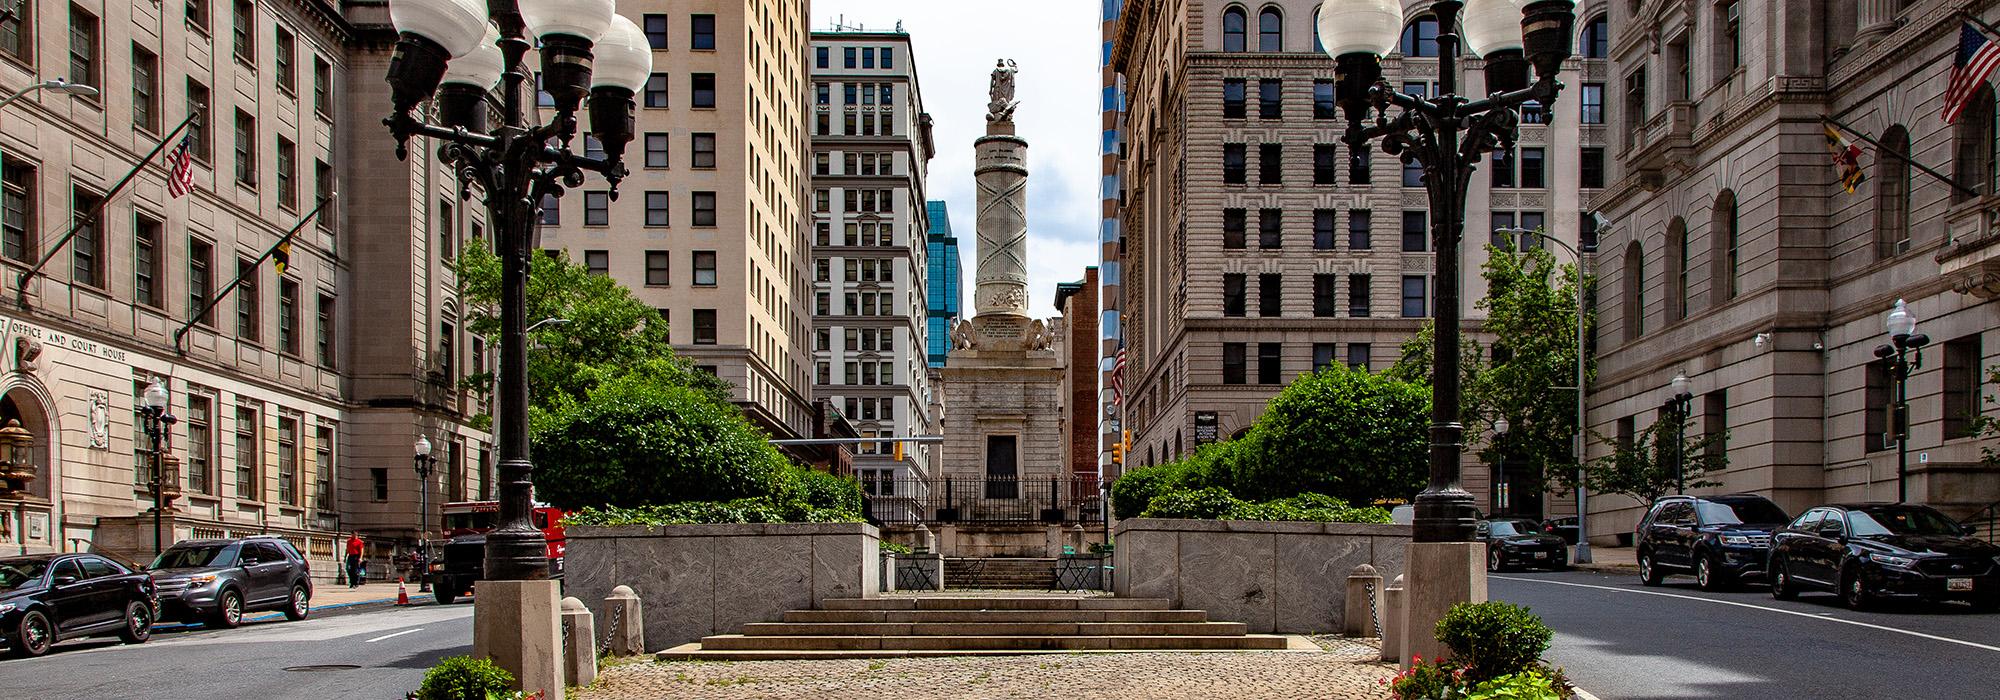 Battle Monument, Baltimore, MD